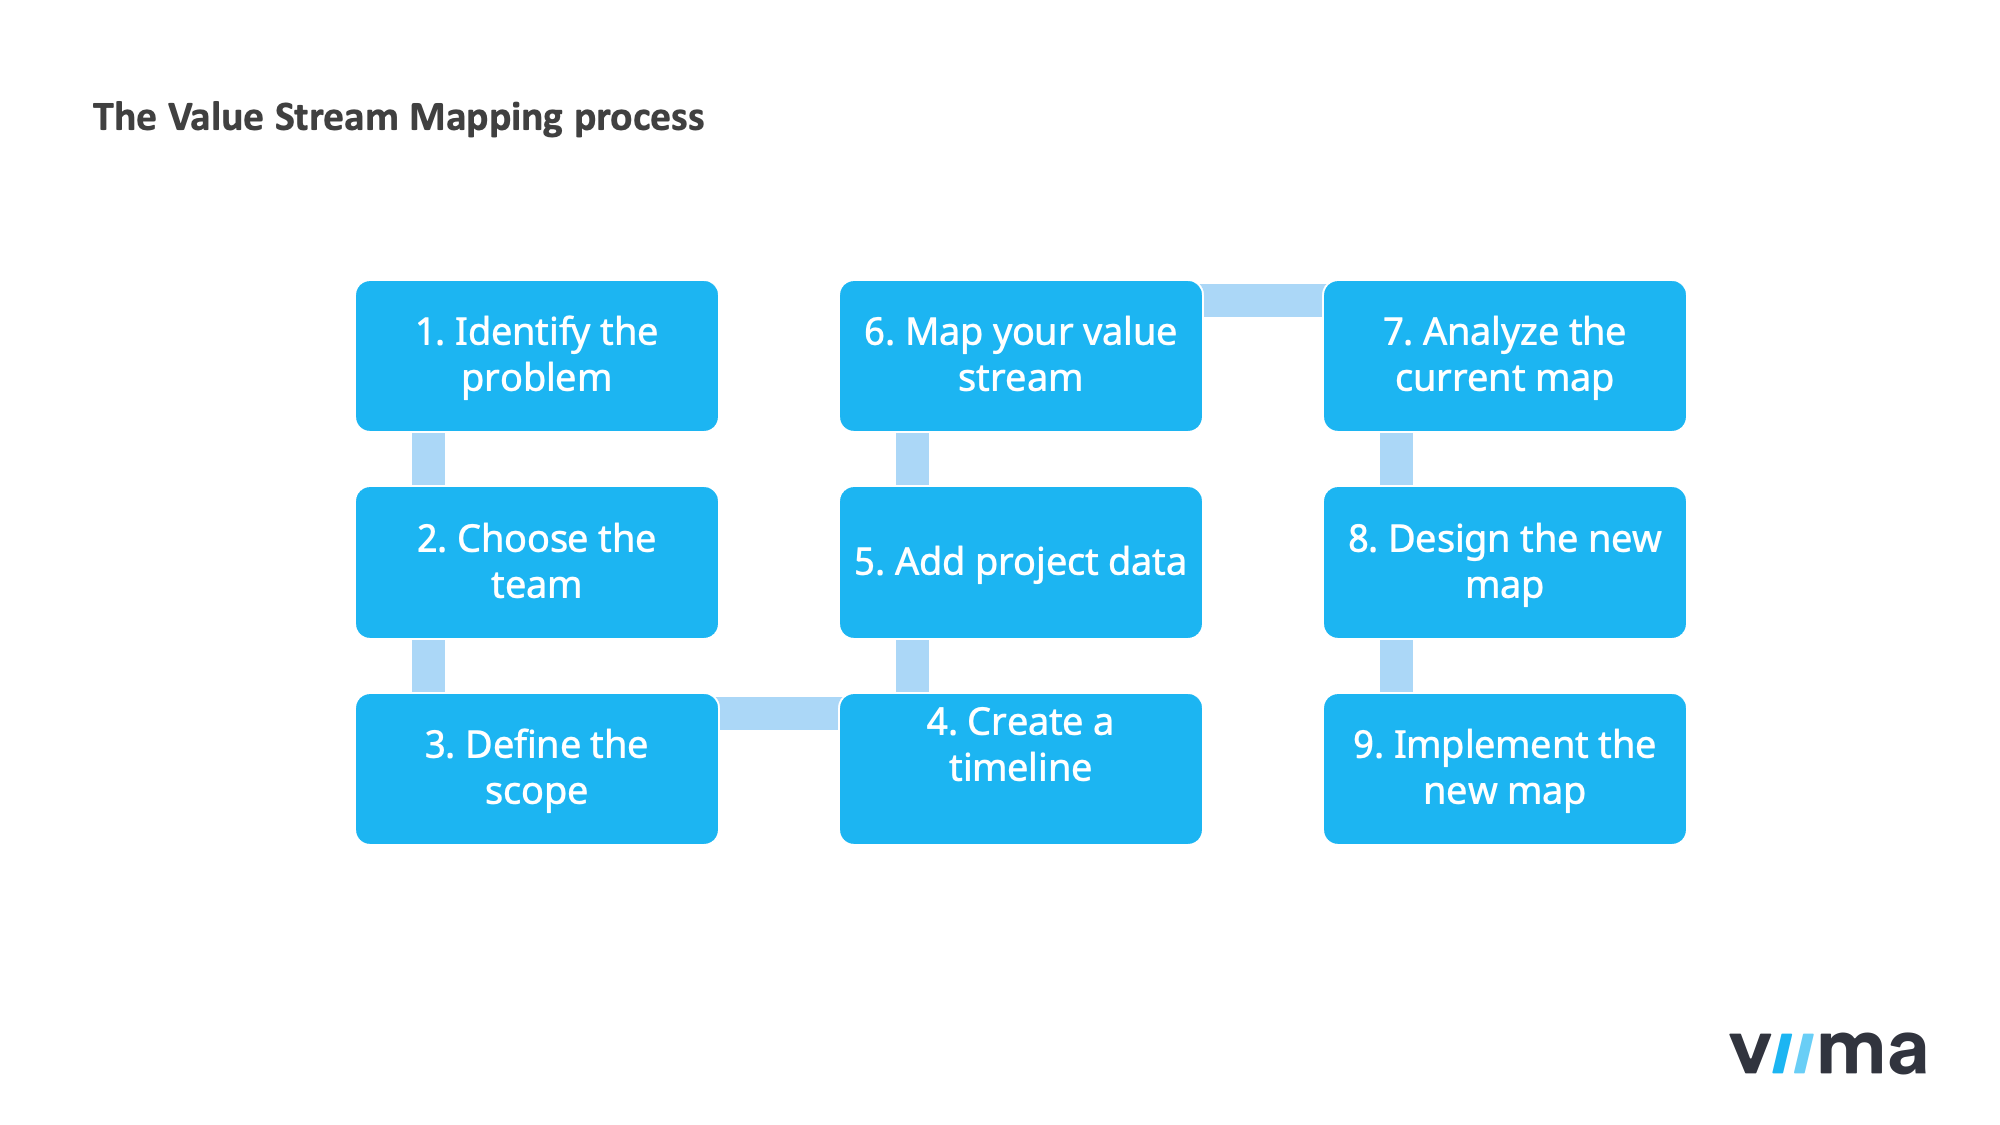 Value stream mapping steps